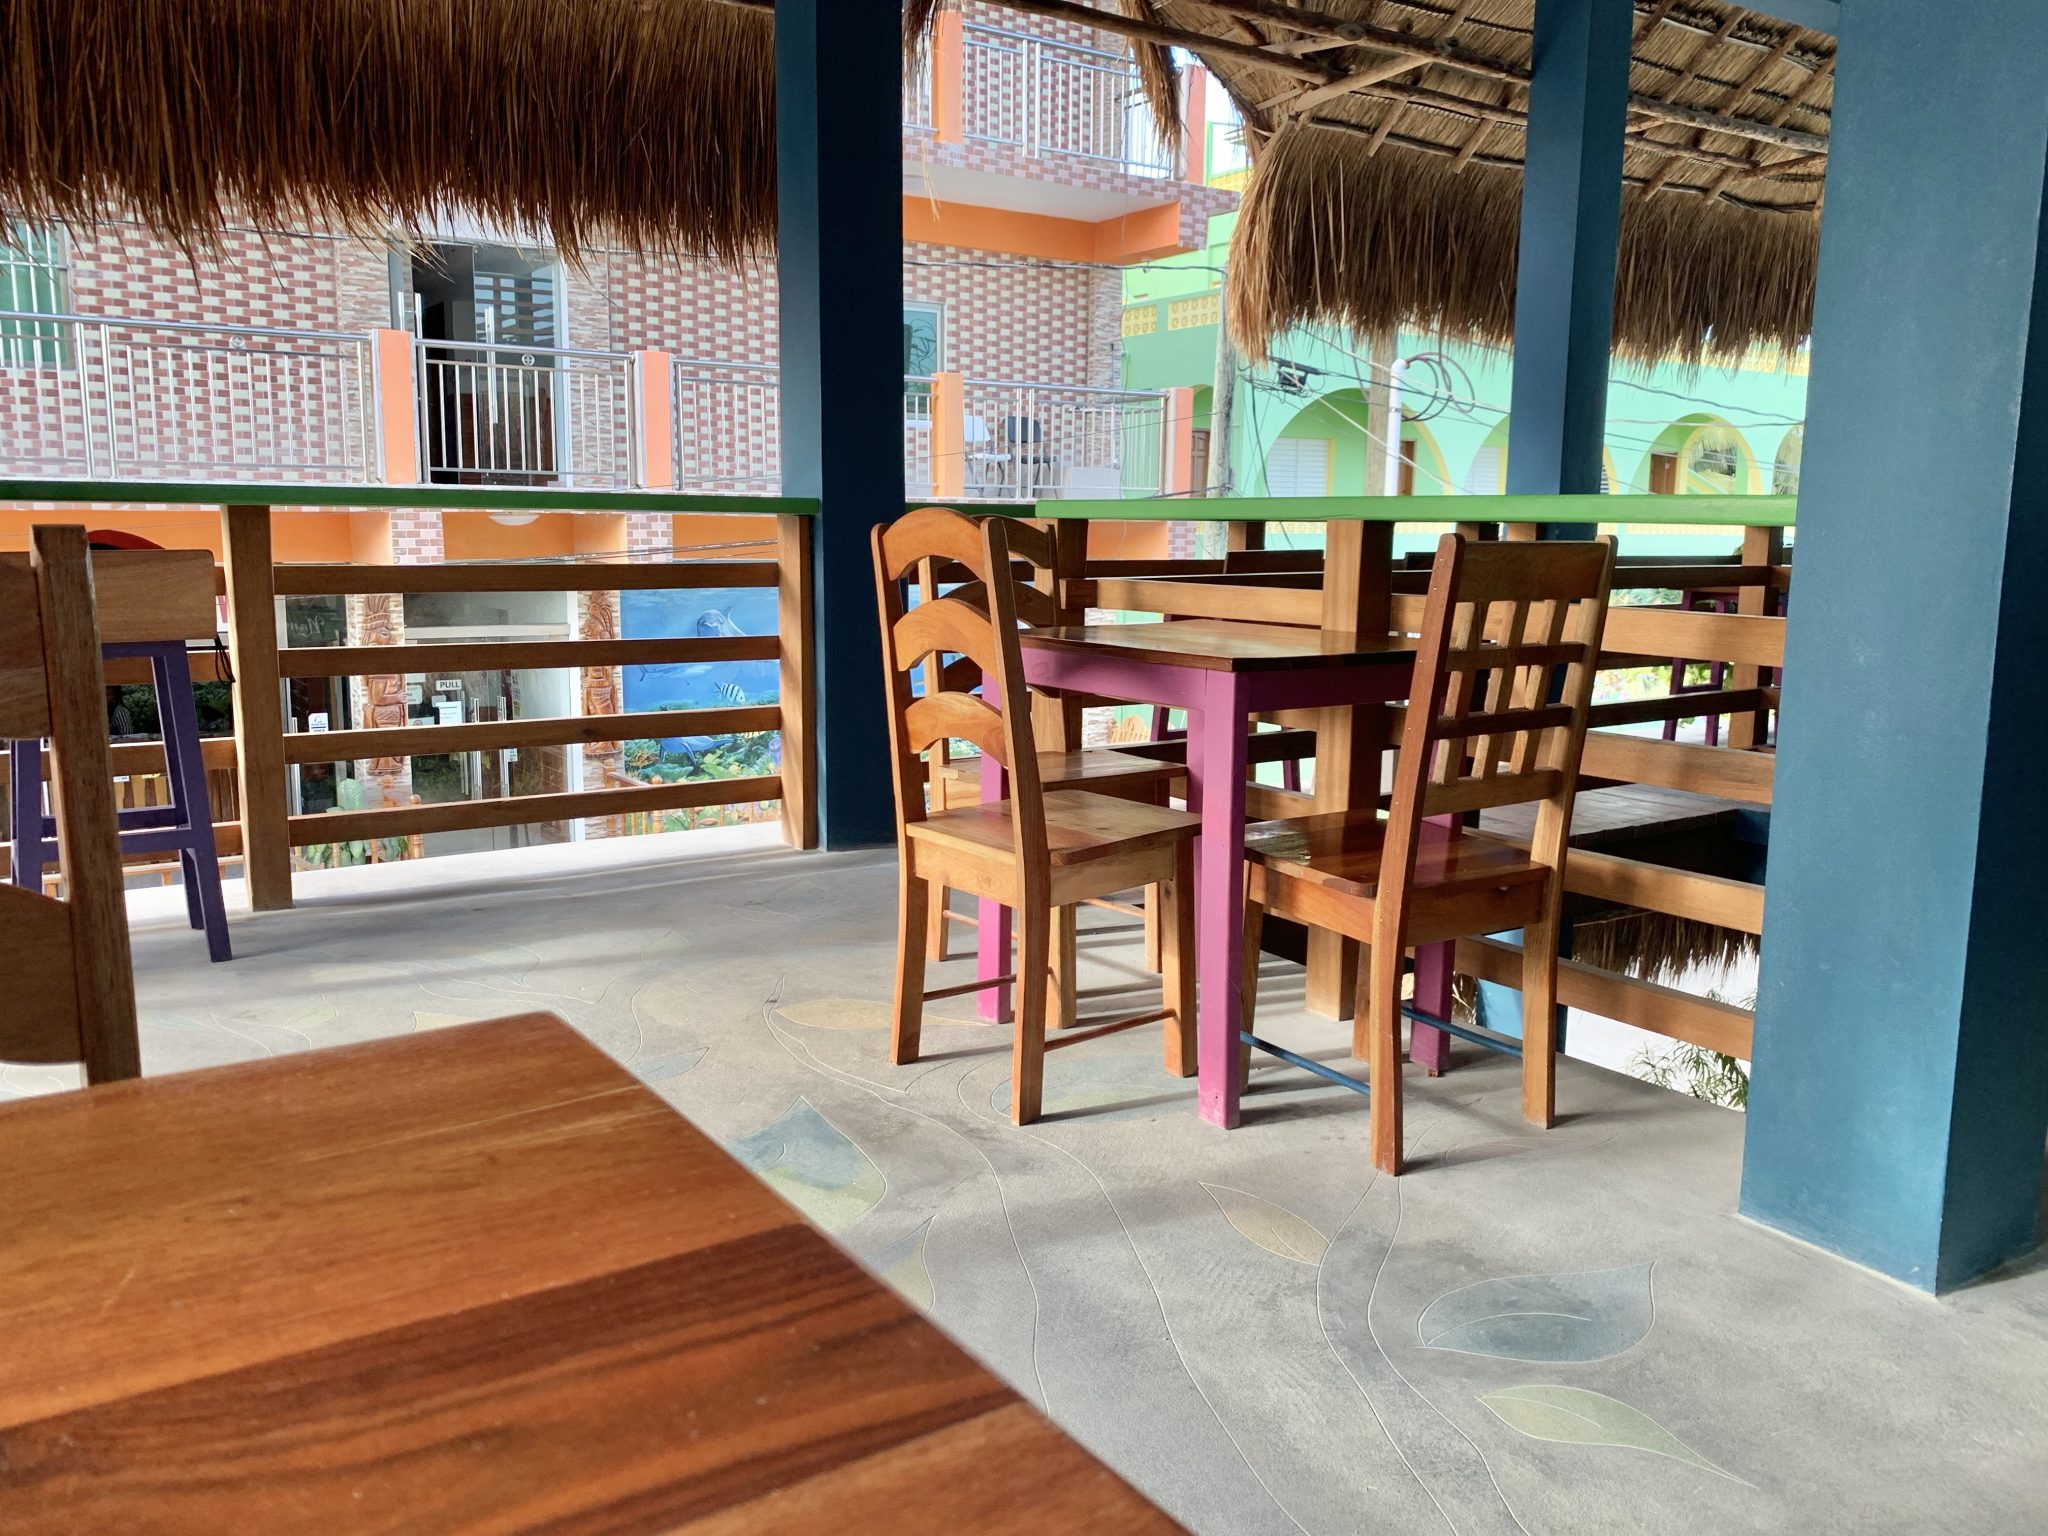 Namaste Cafe in Caye Caulker, Belize has an endless menu of sweets, smoothies and sandwiches.